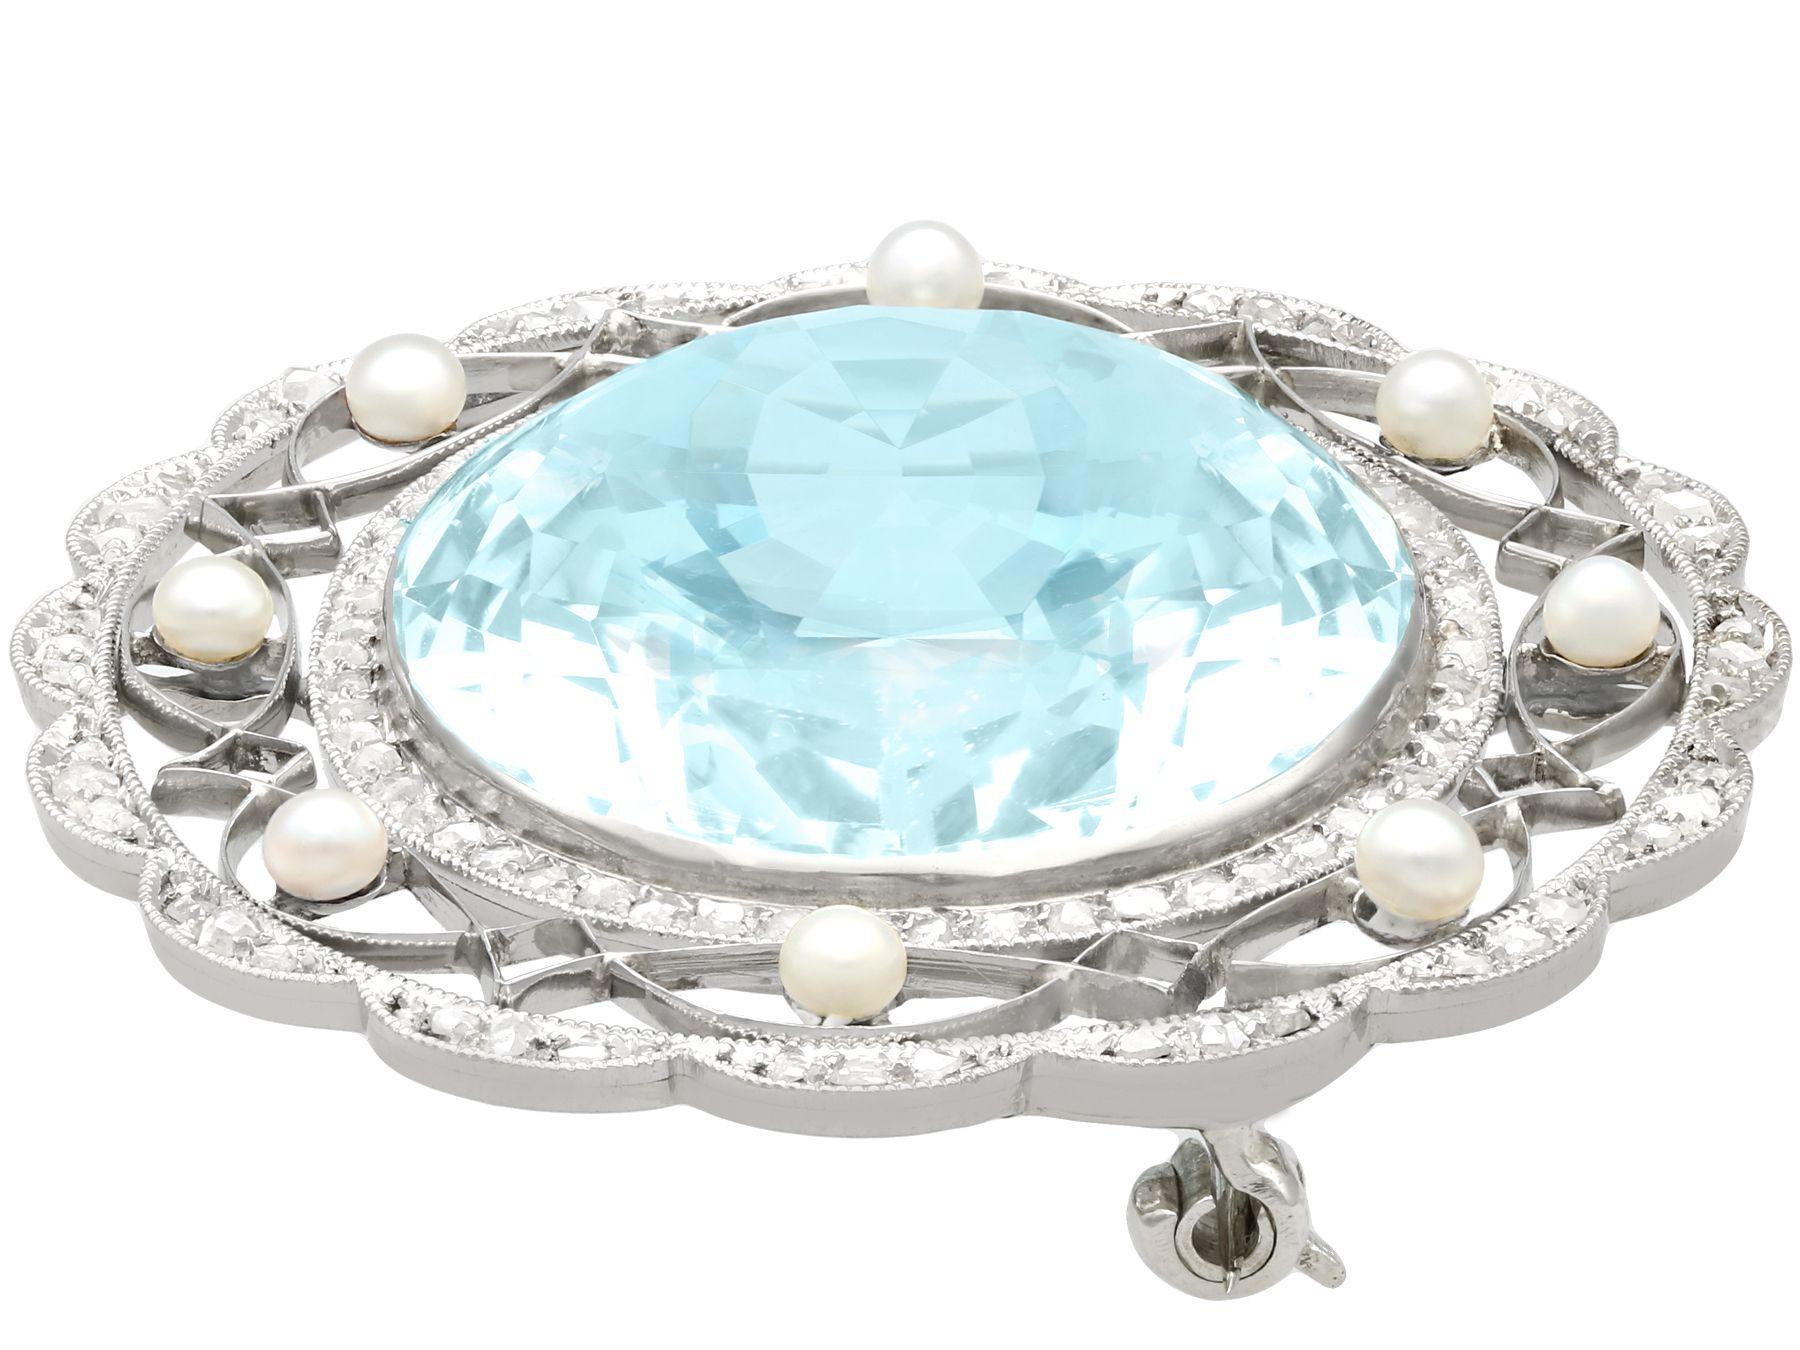 1910s, Antique 43.84 Carat Oval Cut Aquamarine Diamond and Pearl Platinum Brooch In Excellent Condition For Sale In Jesmond, Newcastle Upon Tyne